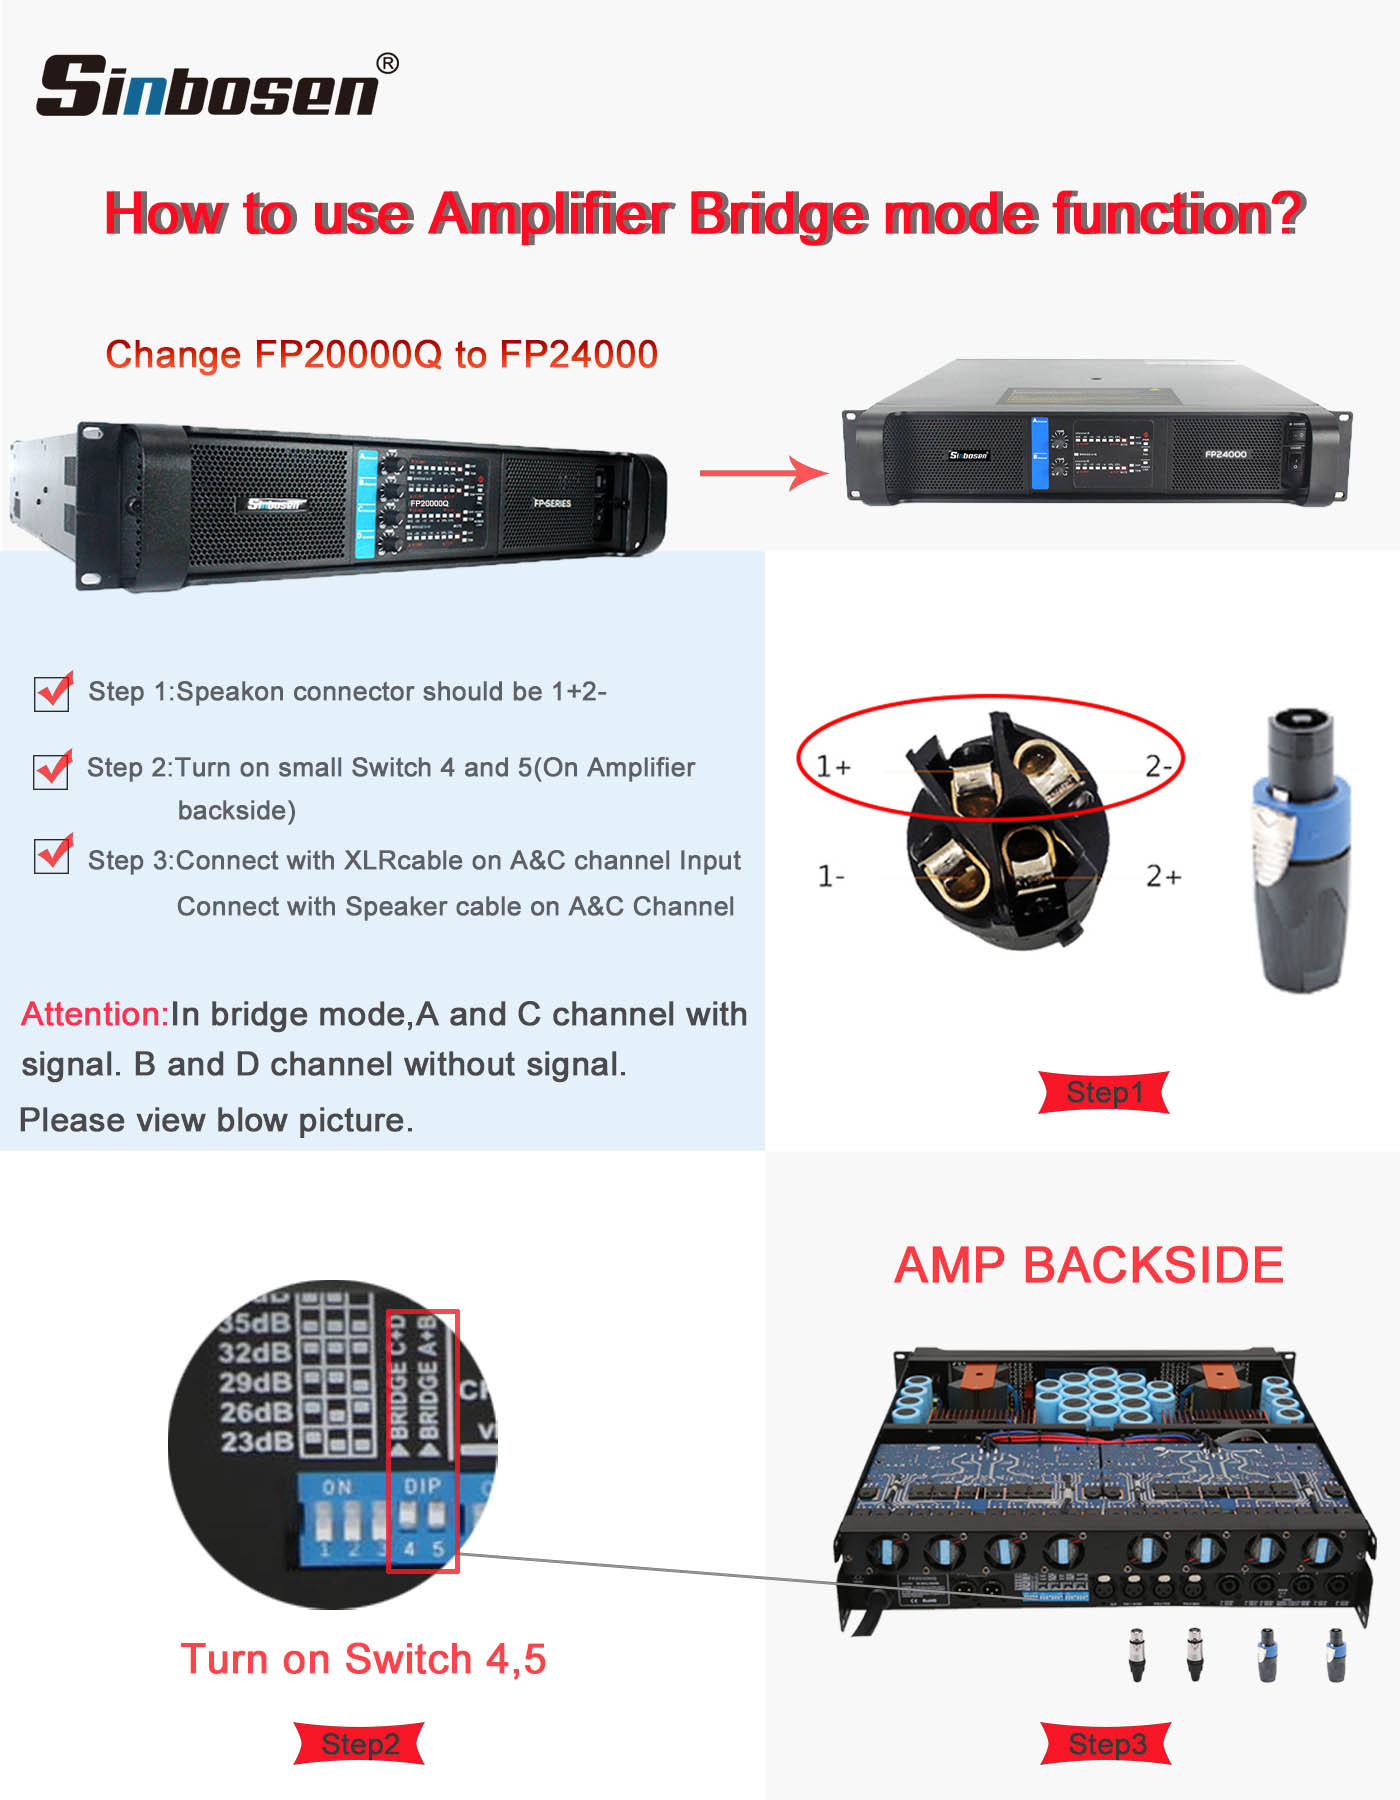 How to use Amplifiers Bridge mode function?